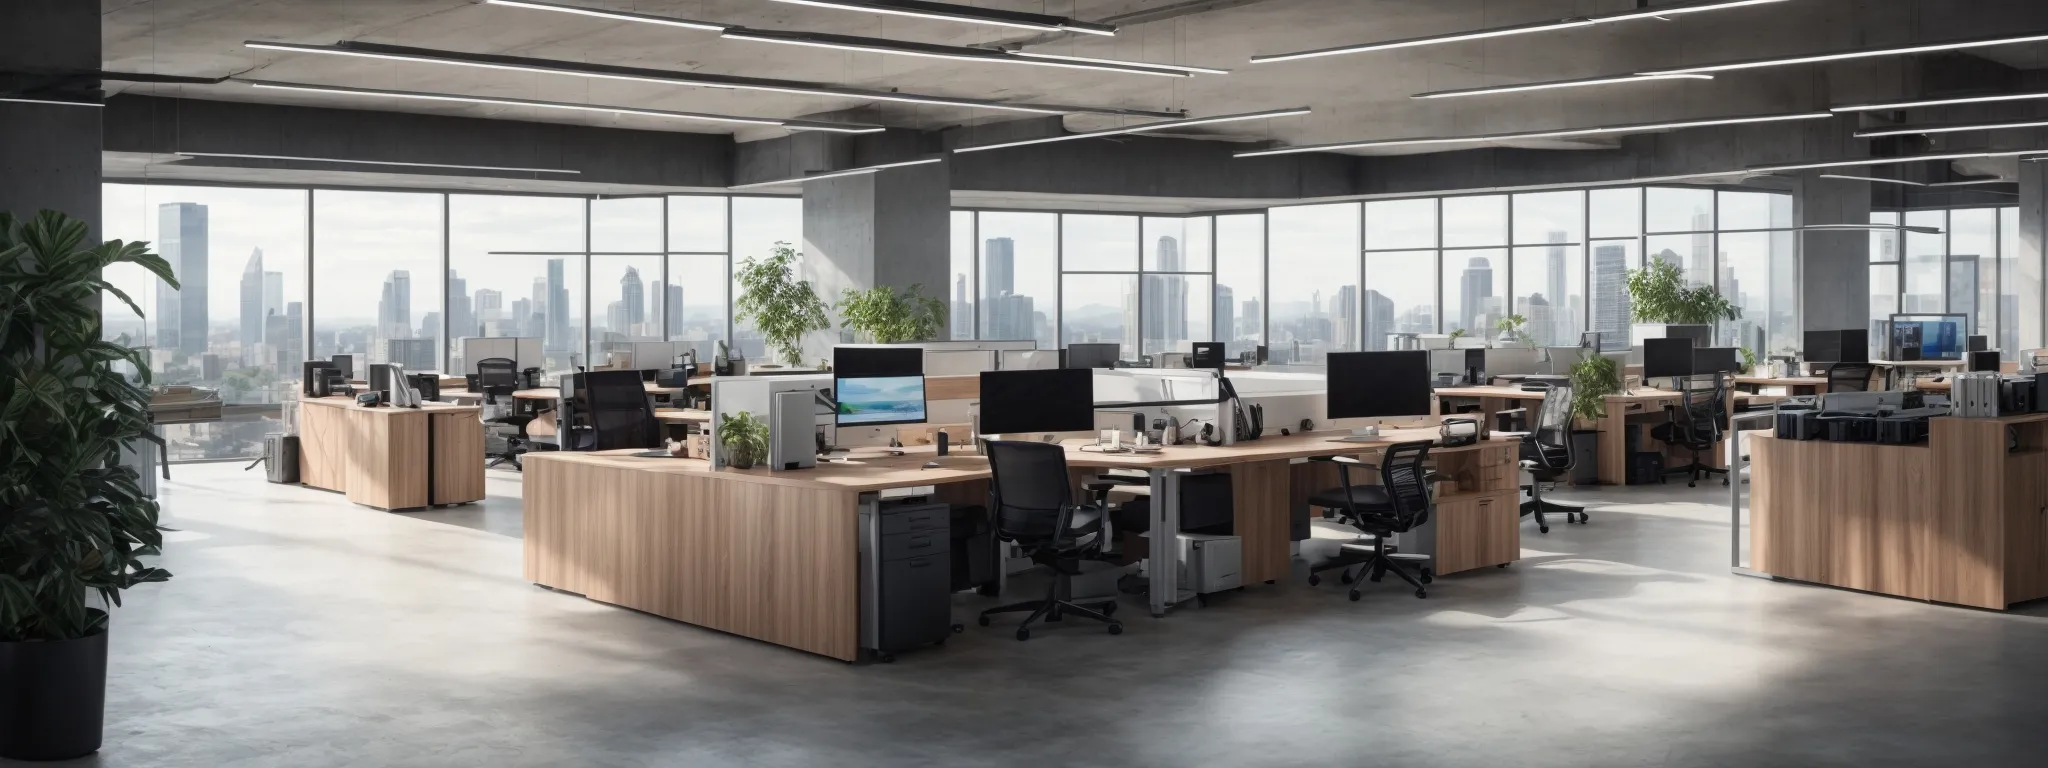 a panoramic view of a modern office with an open workspace filled with sleek computers and digital interfaces, signifying a hub of digital marketing innovation.